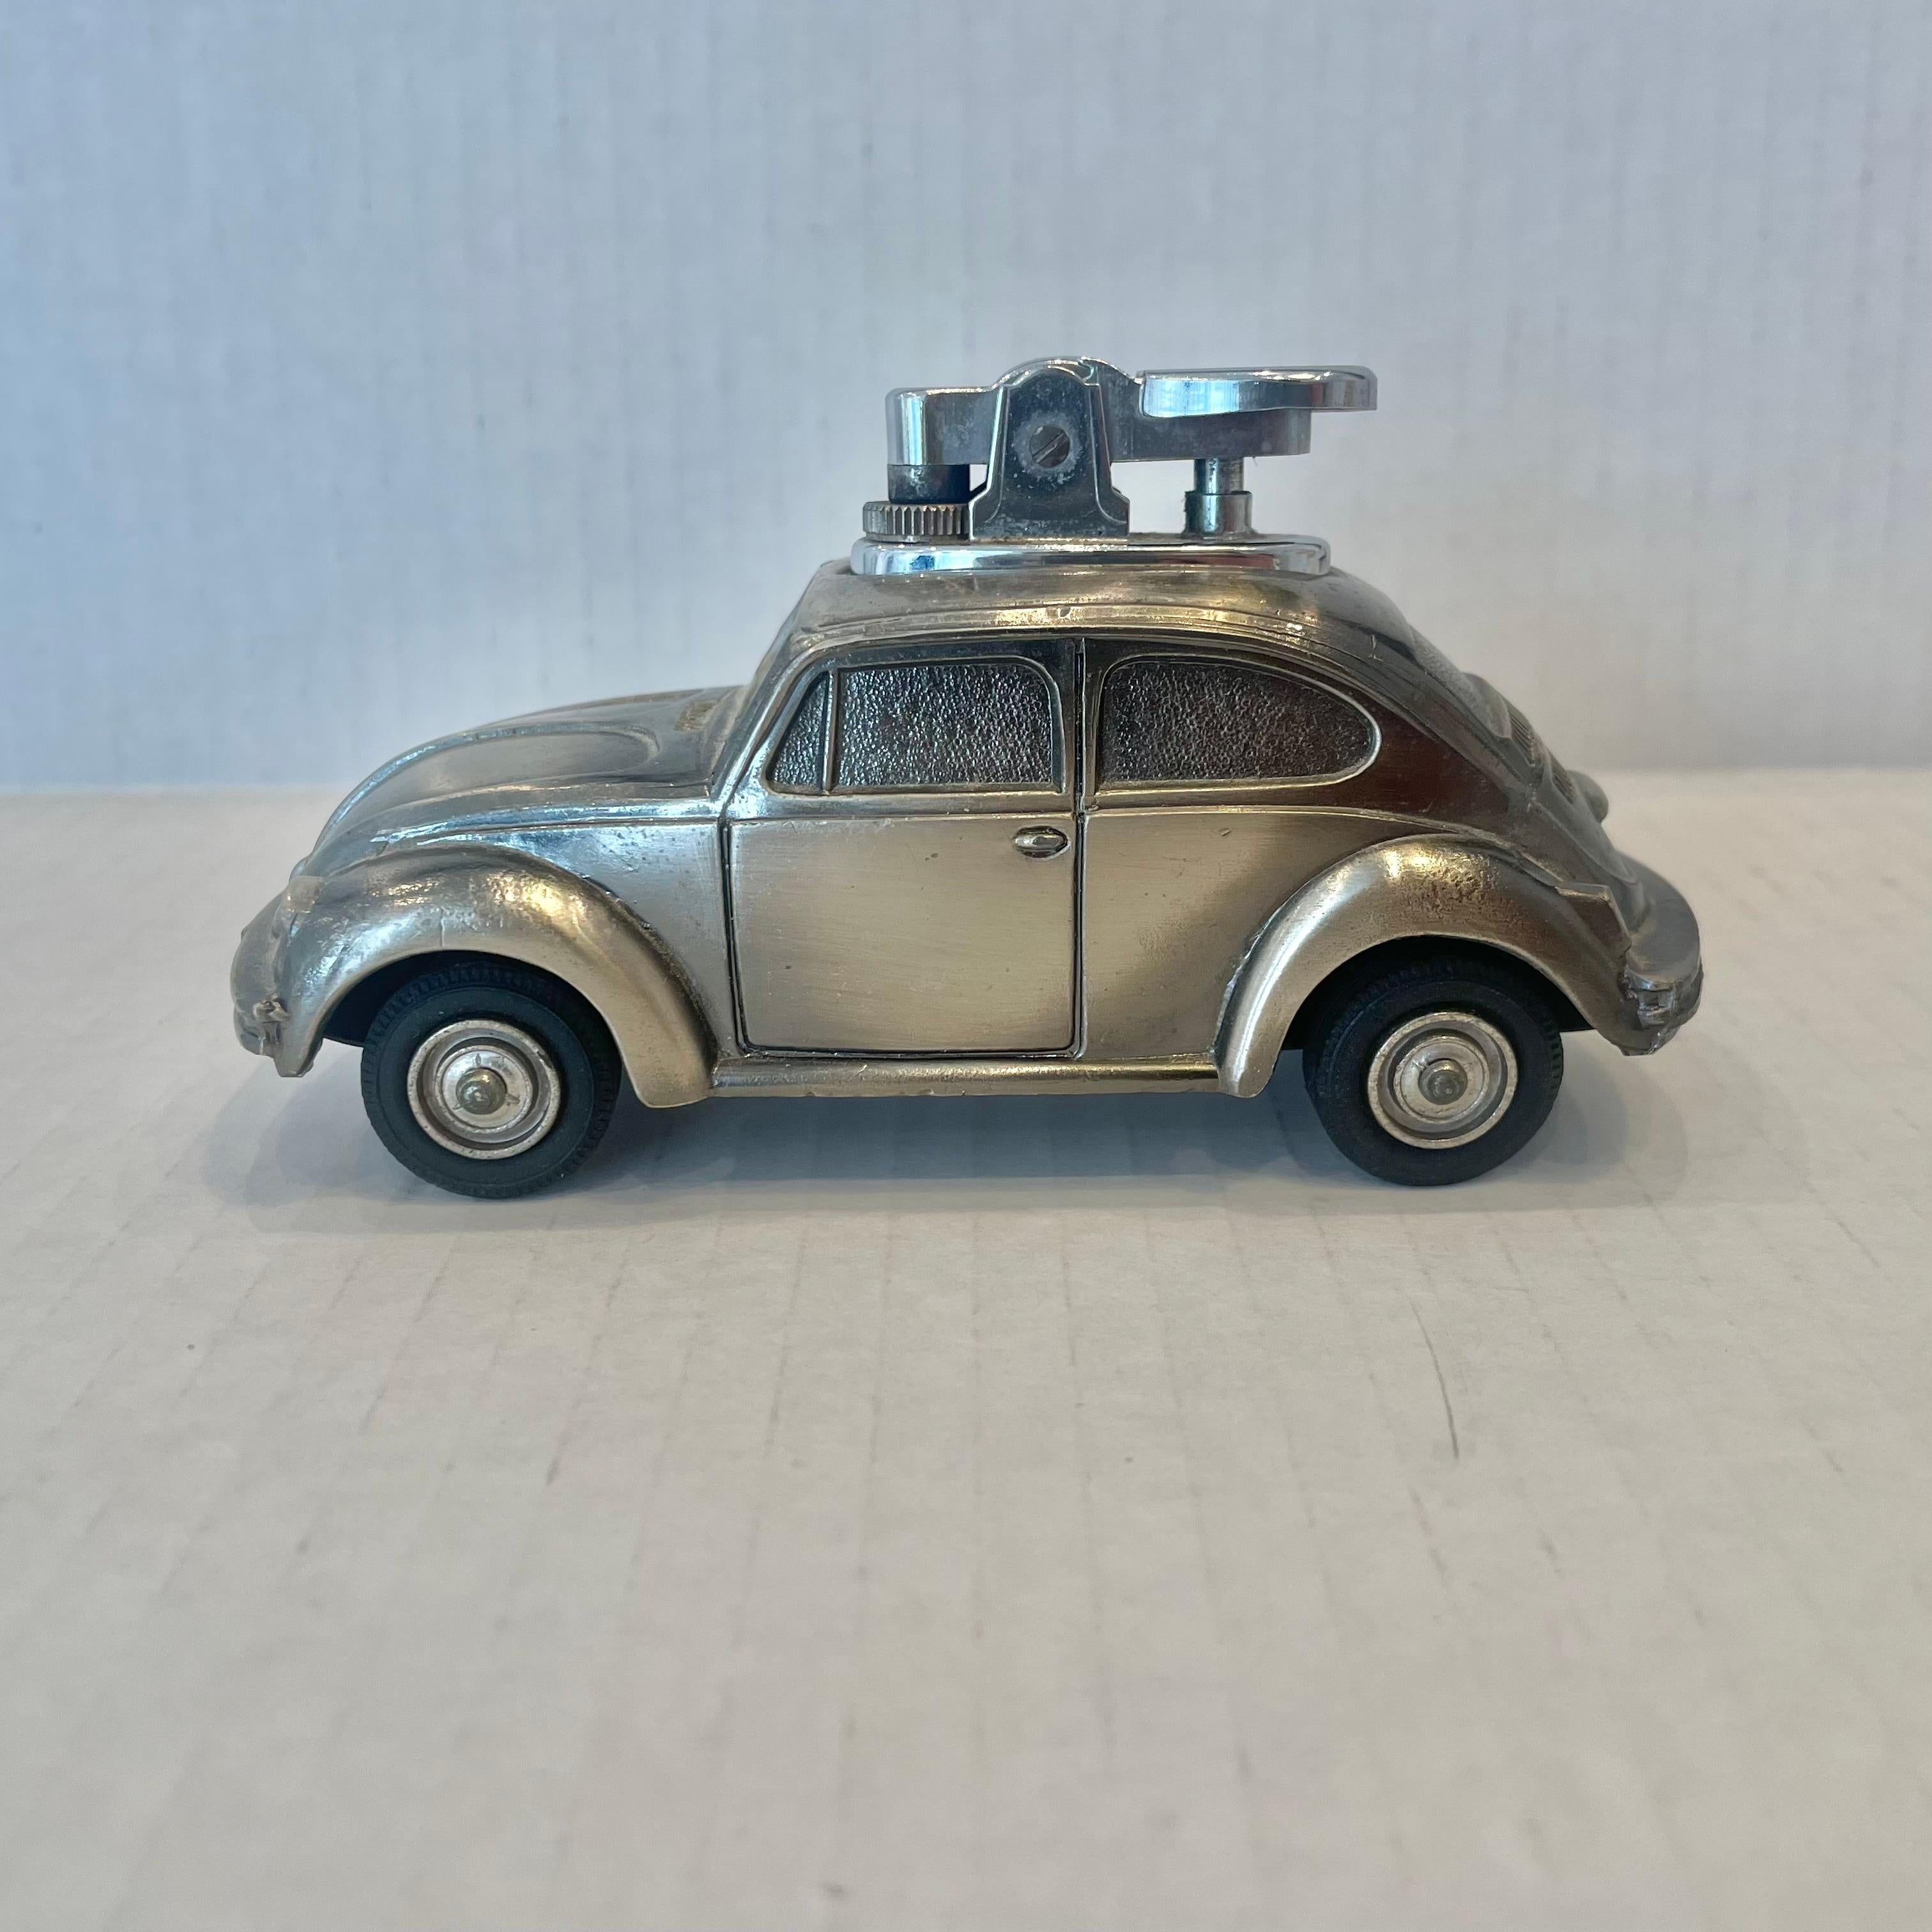 Fun, vintage table lighter in the shape of a Volkswagen Beetle. Made completely of metal with a hollow body. Great silver color with nice details throughout and finished off with thin rubber tires. Cool tobacco accessory and conversation piece.